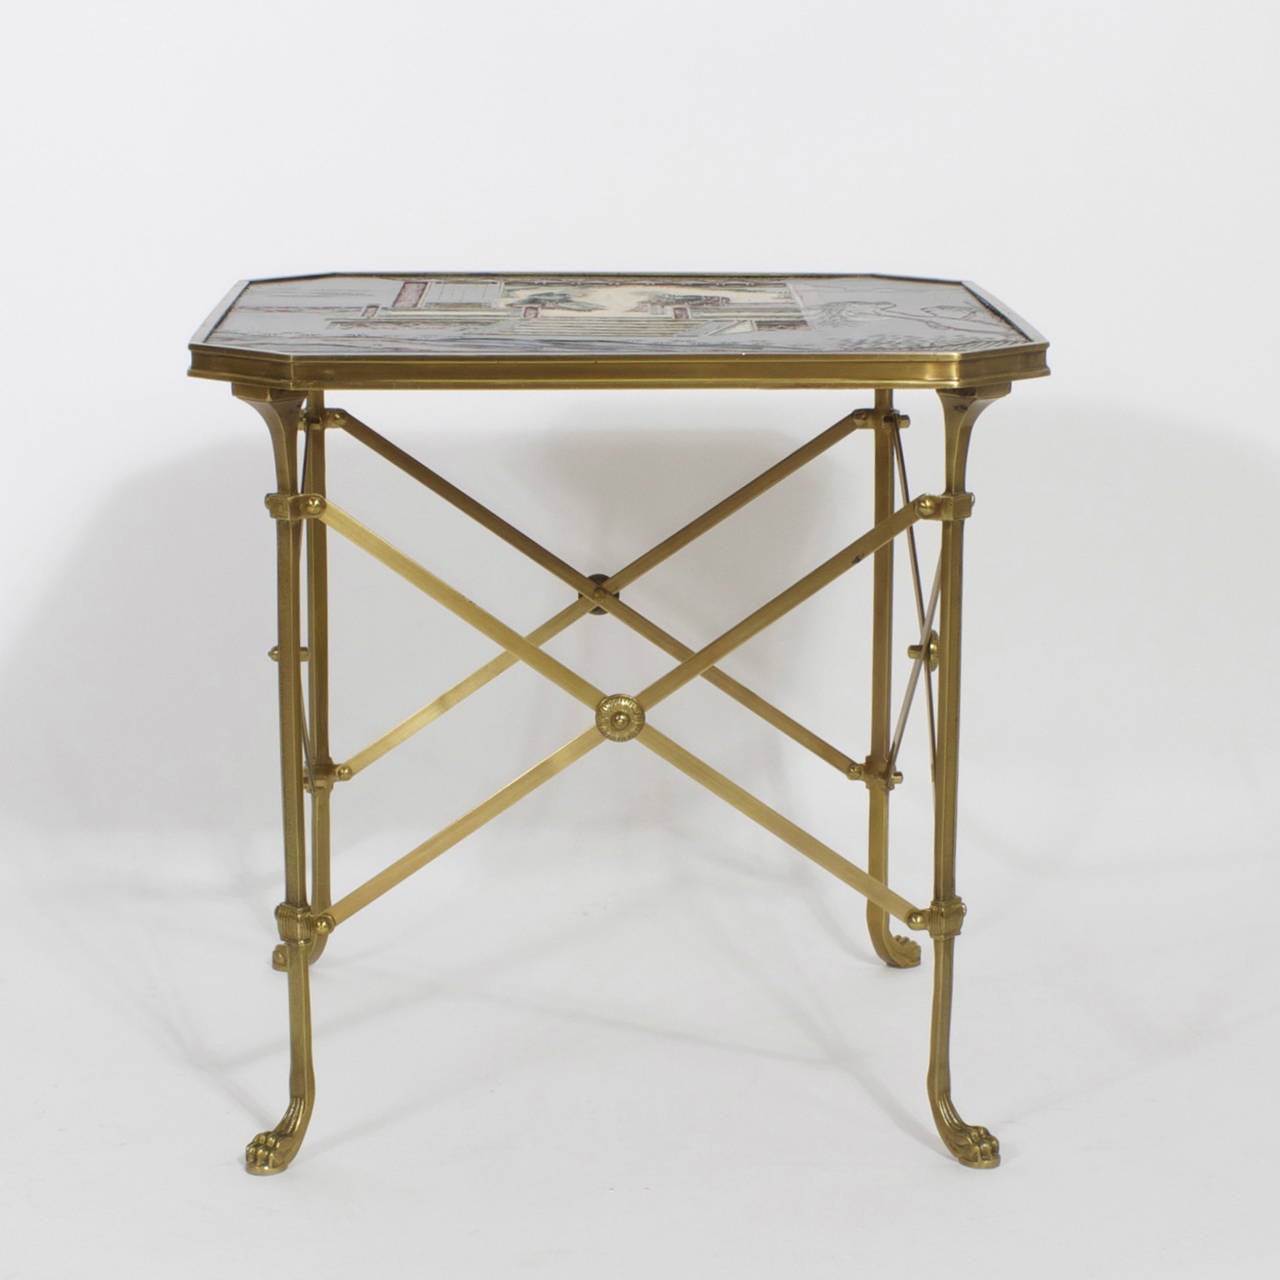 French Pair of Neoclassical Style Chinoiserie Tables in the Jansen Manner